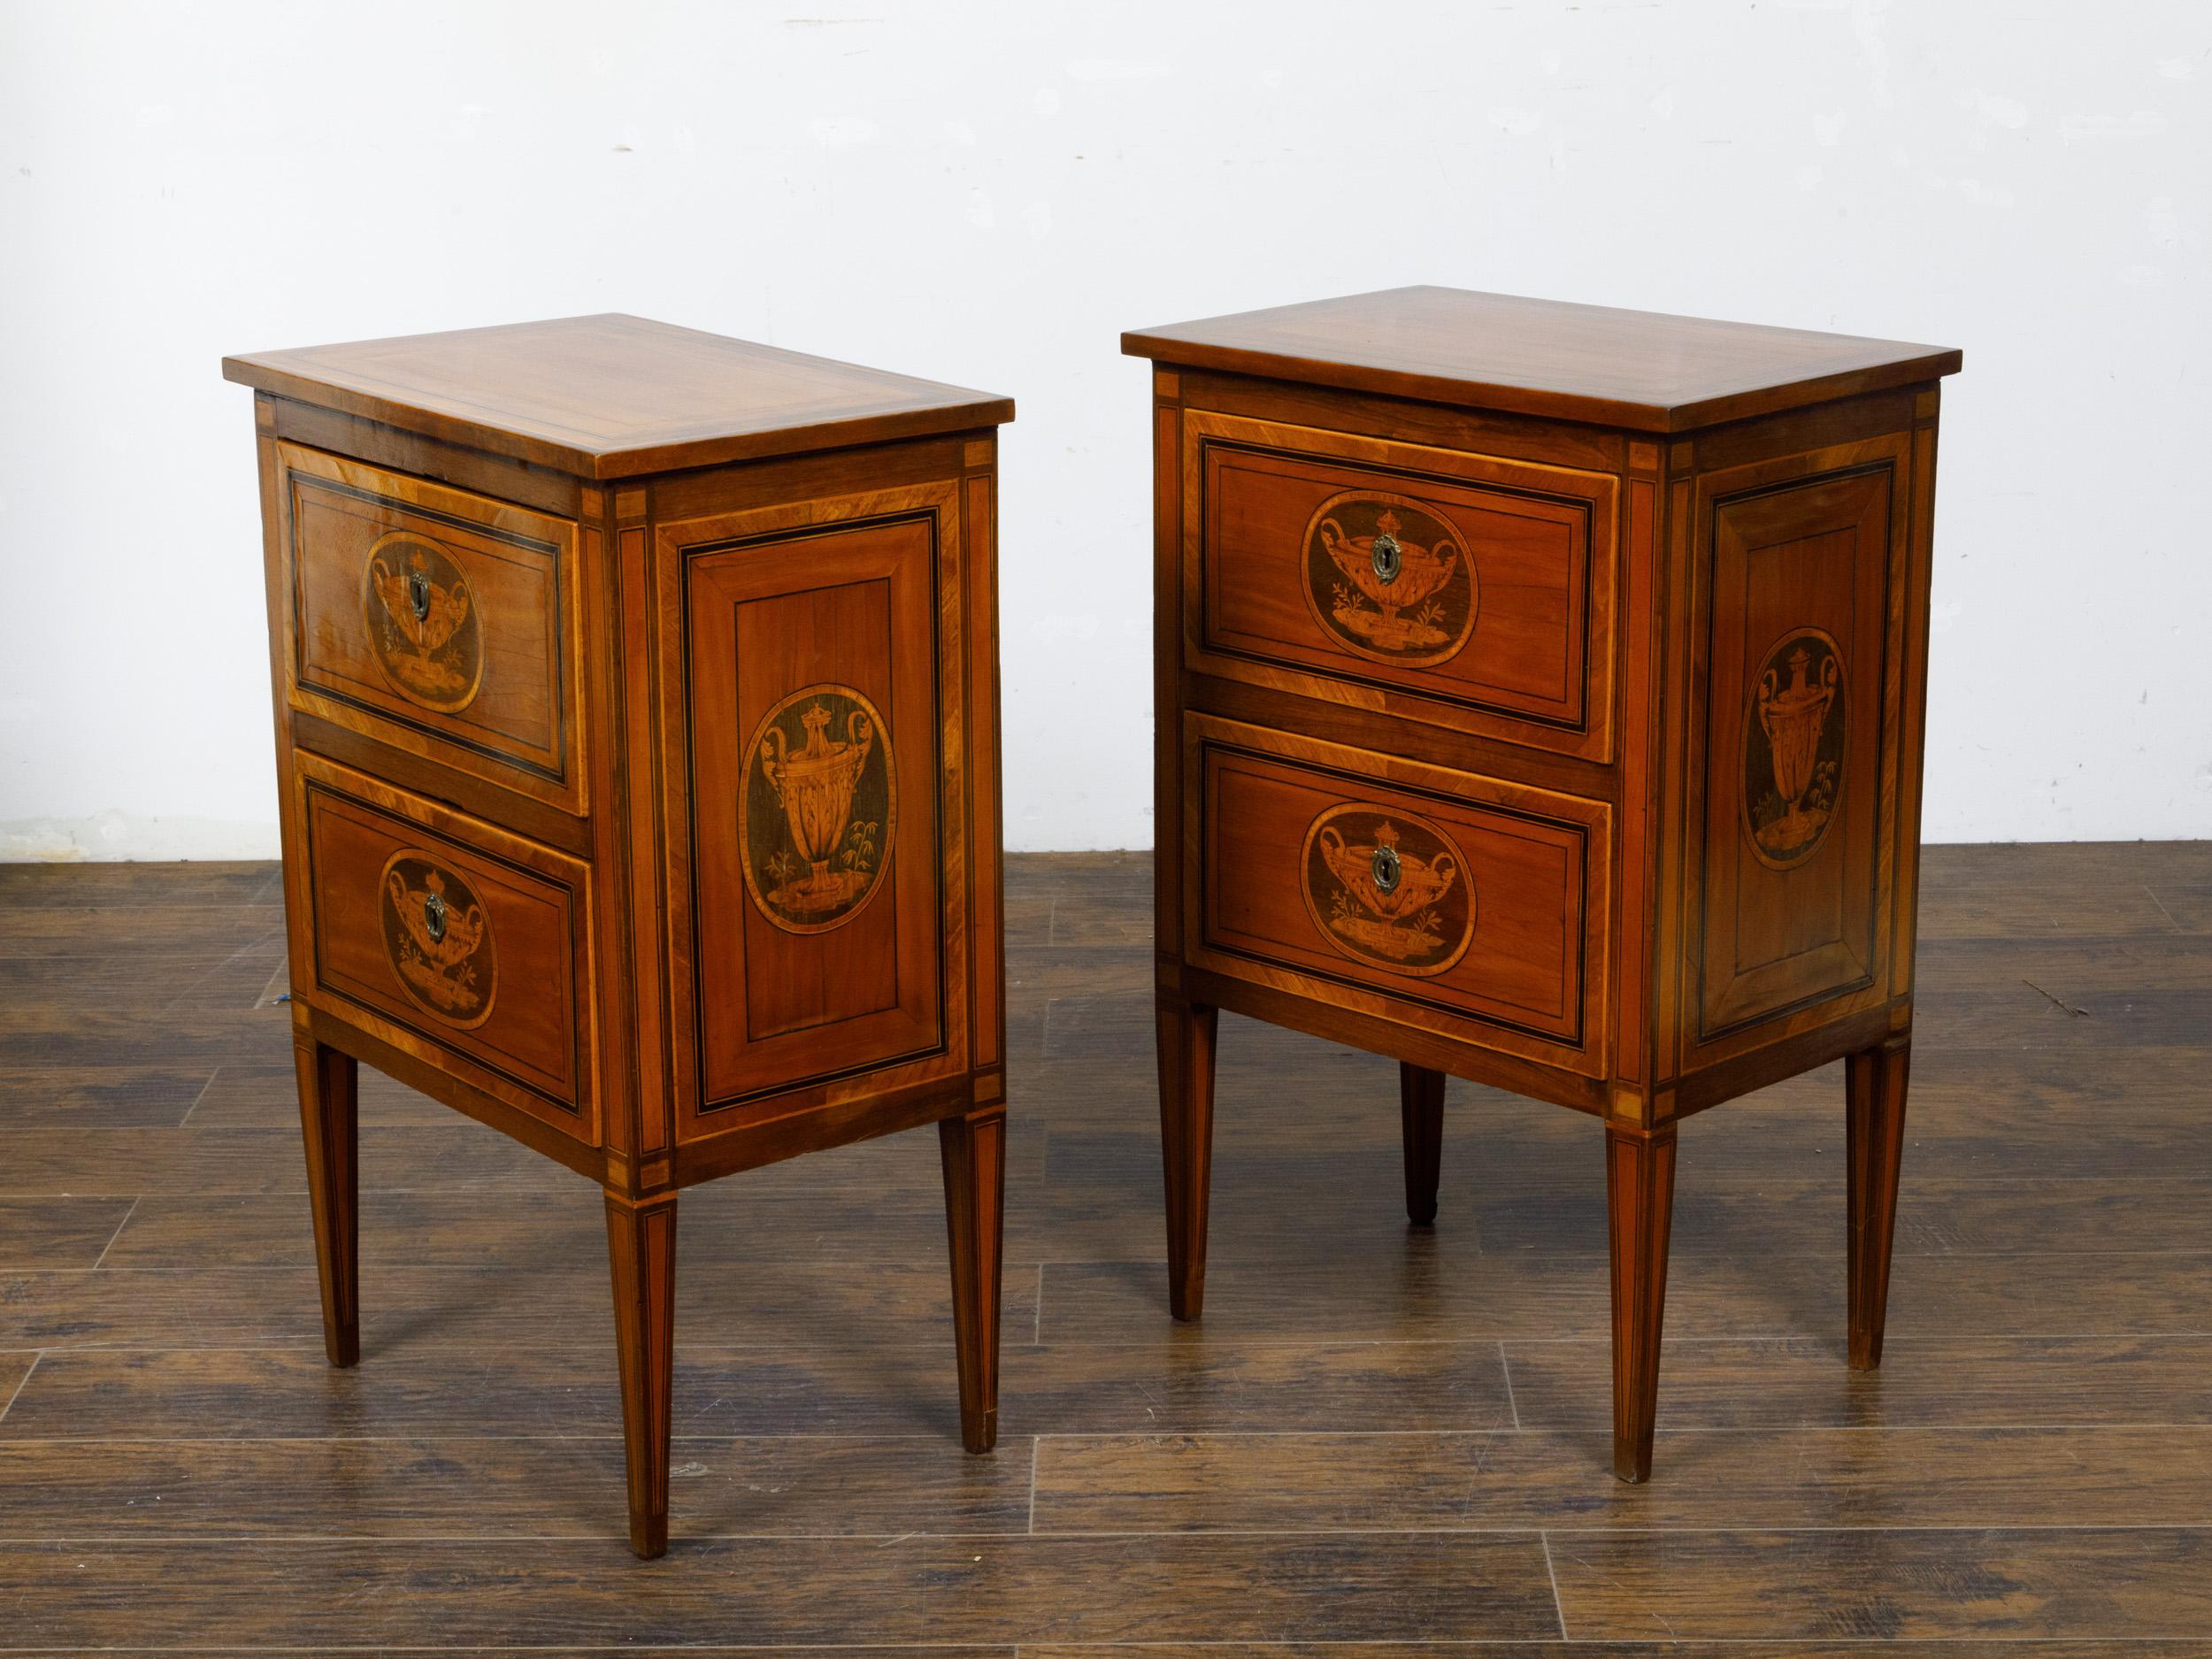 A pair of Italian Neoclassical style walnut bedside tables from circa 1800 with two drawers and marquetry décor. This pair of Neoclassical period Italian walnut bedside tables from circa 1800 showcases the unparalleled craftsmanship and elegant